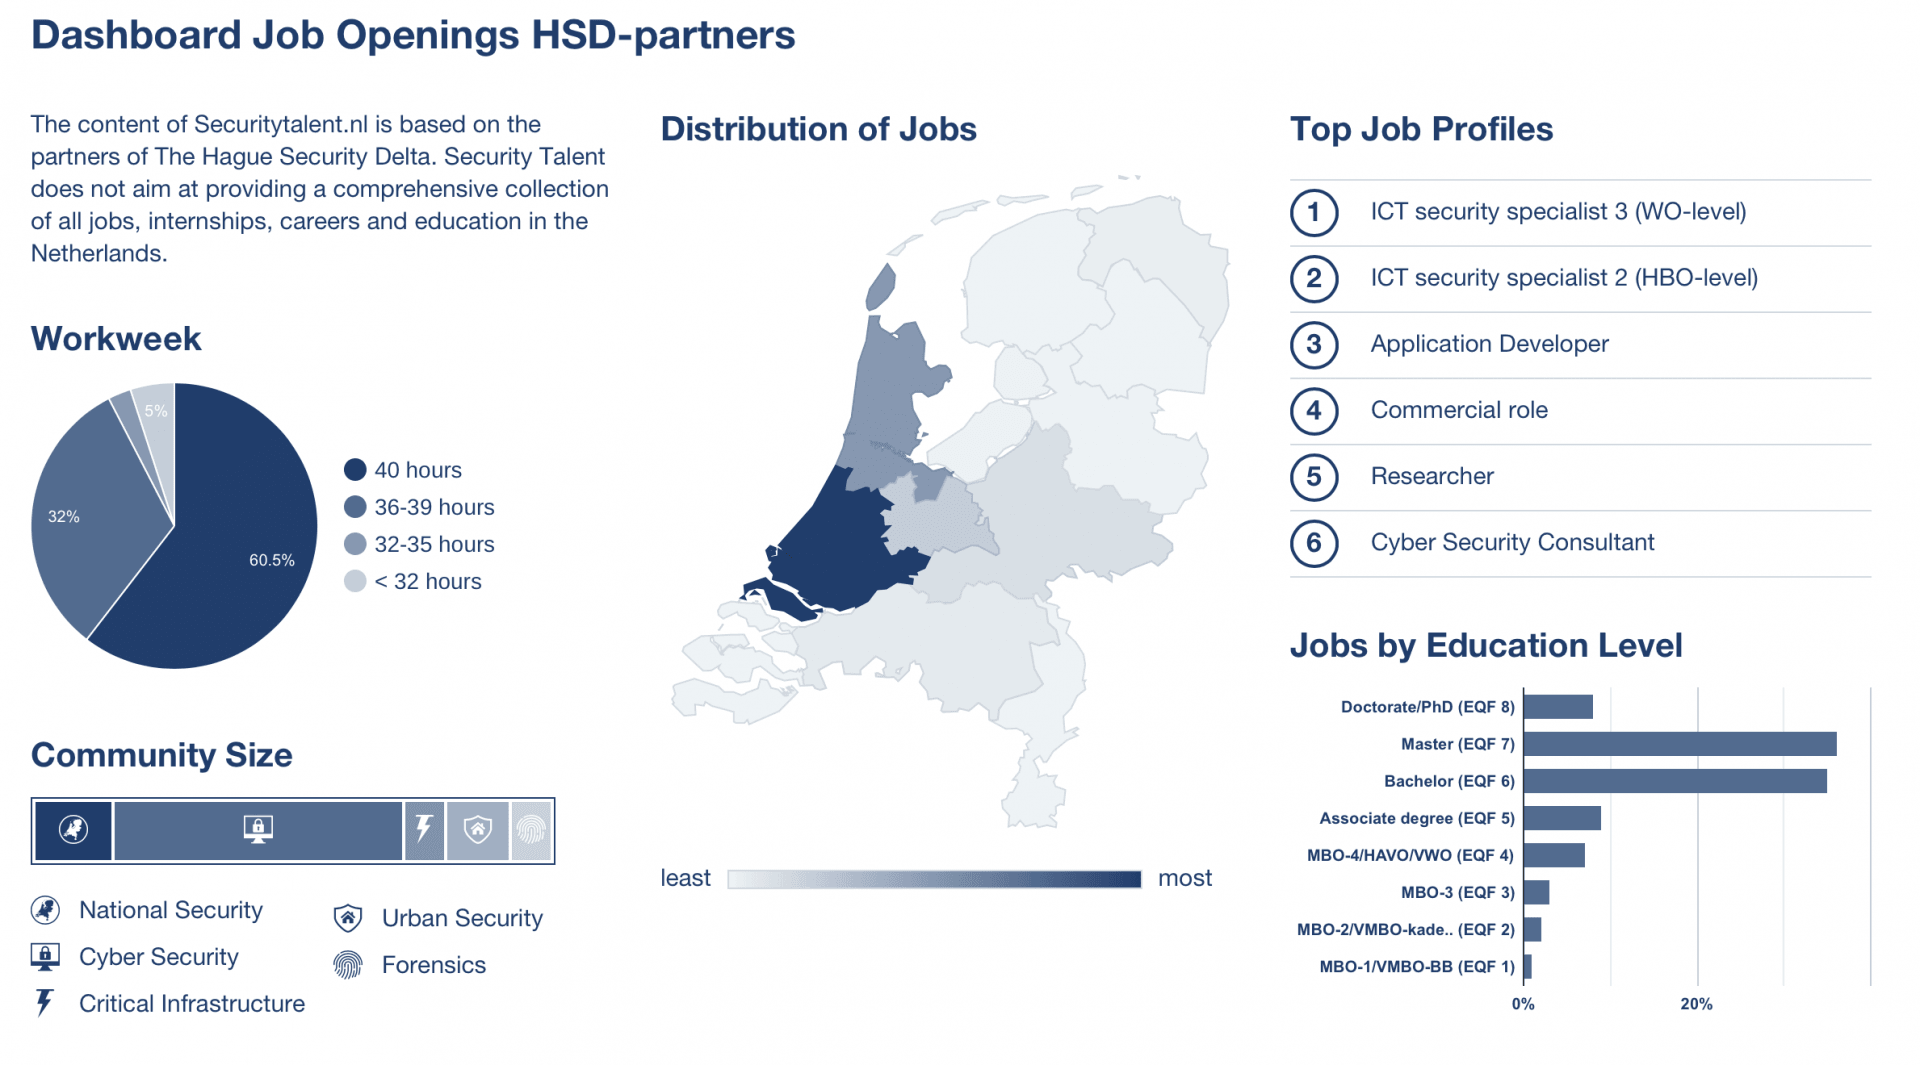 New on Securitytalent.nl: Dashboard Job Openings HSD-partners  